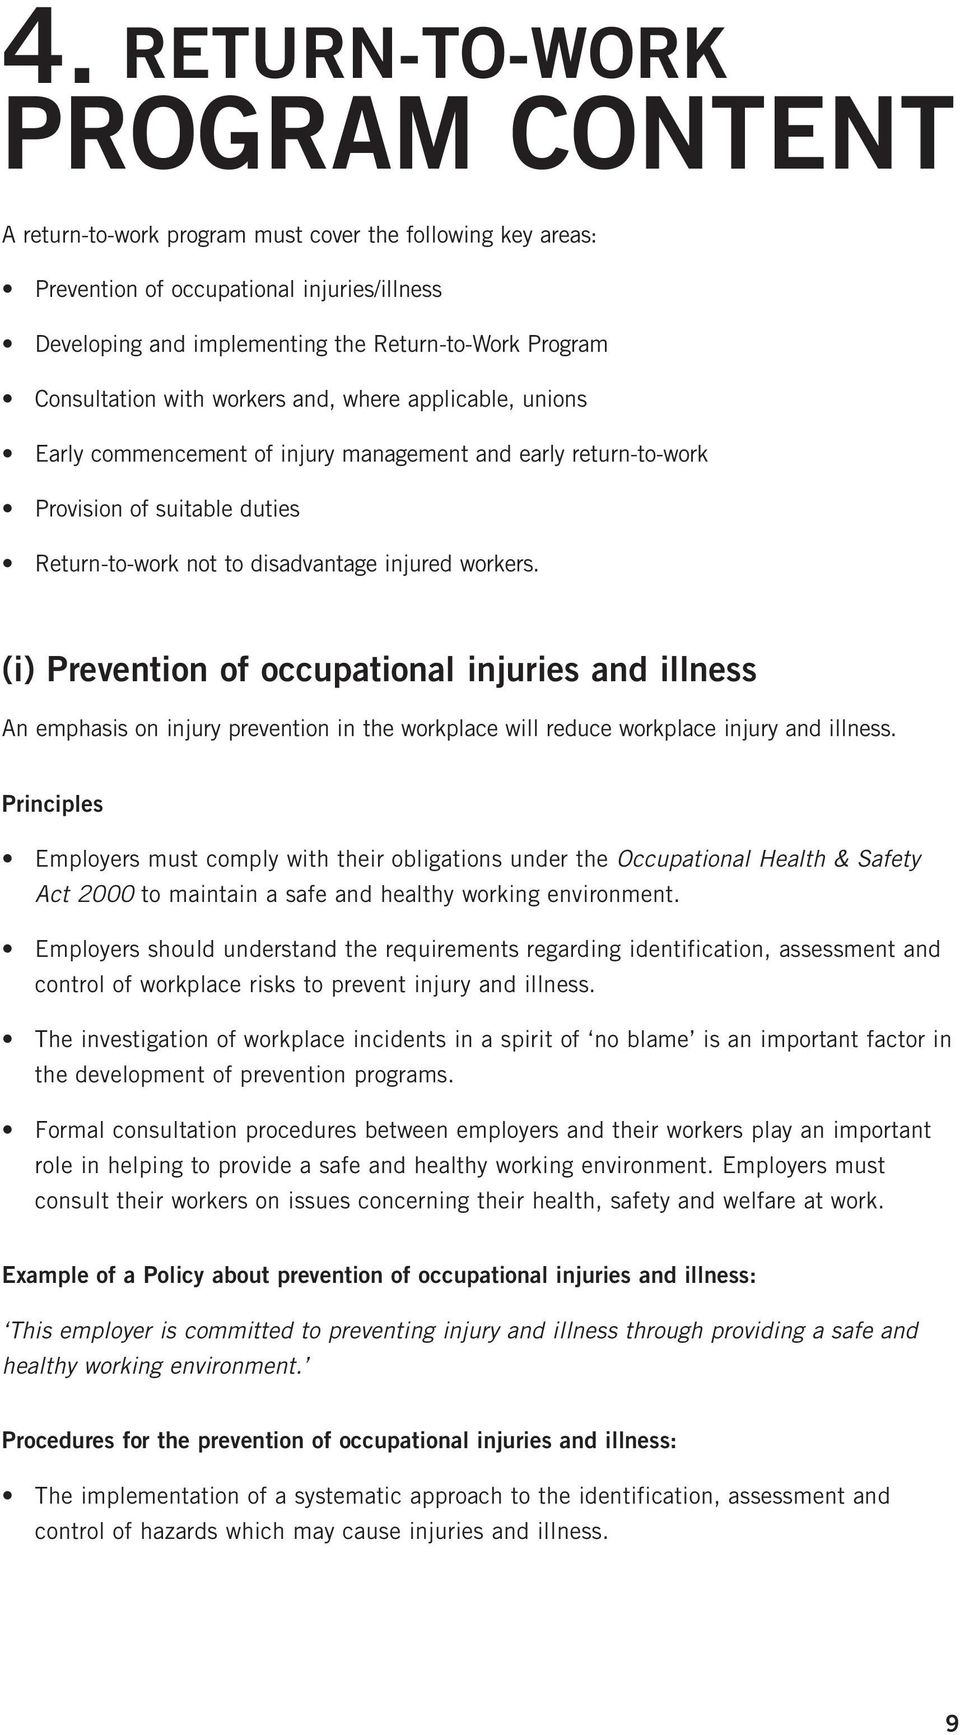 workers. (i) Prevention of occupational injuries and illness An emphasis on injury prevention in the workplace will reduce workplace injury and illness.